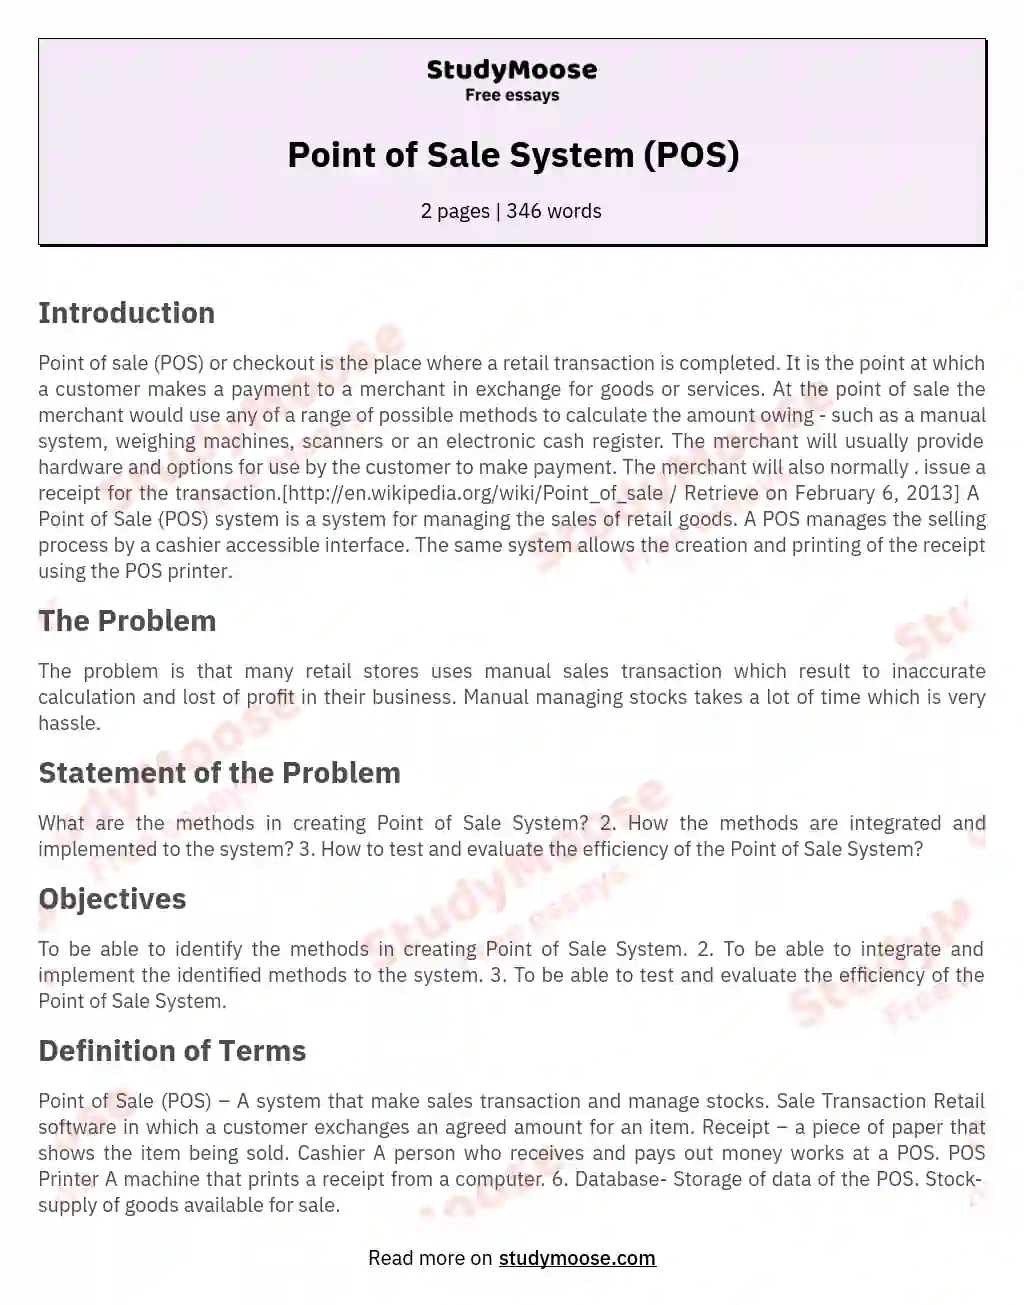 point of sale system thesis statement of the problem